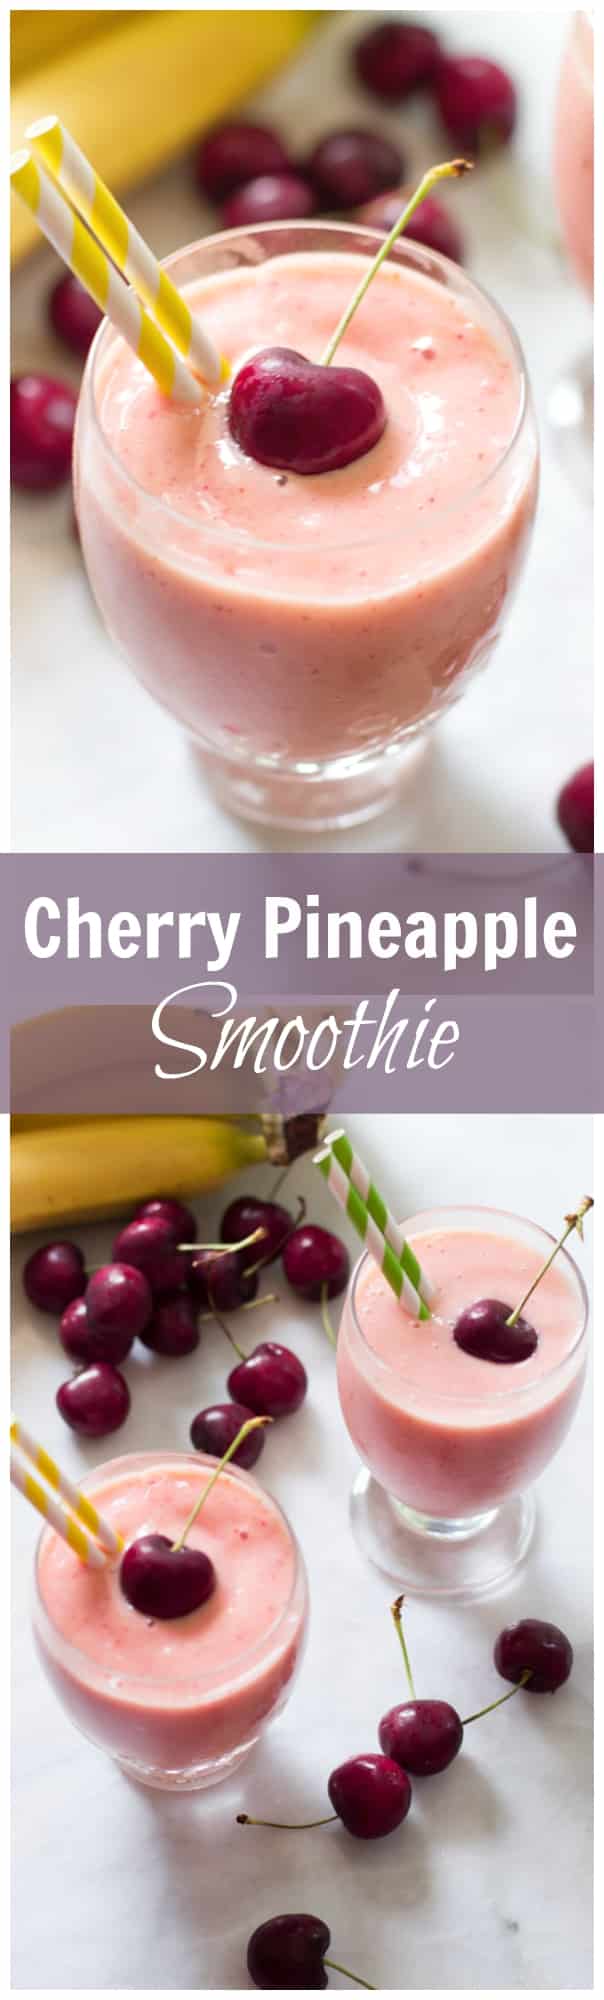 Cherry Pineapple Smoothie - This cherry pineapple smoothie takes just minutes to make and is a great nutritional breakfast option. 